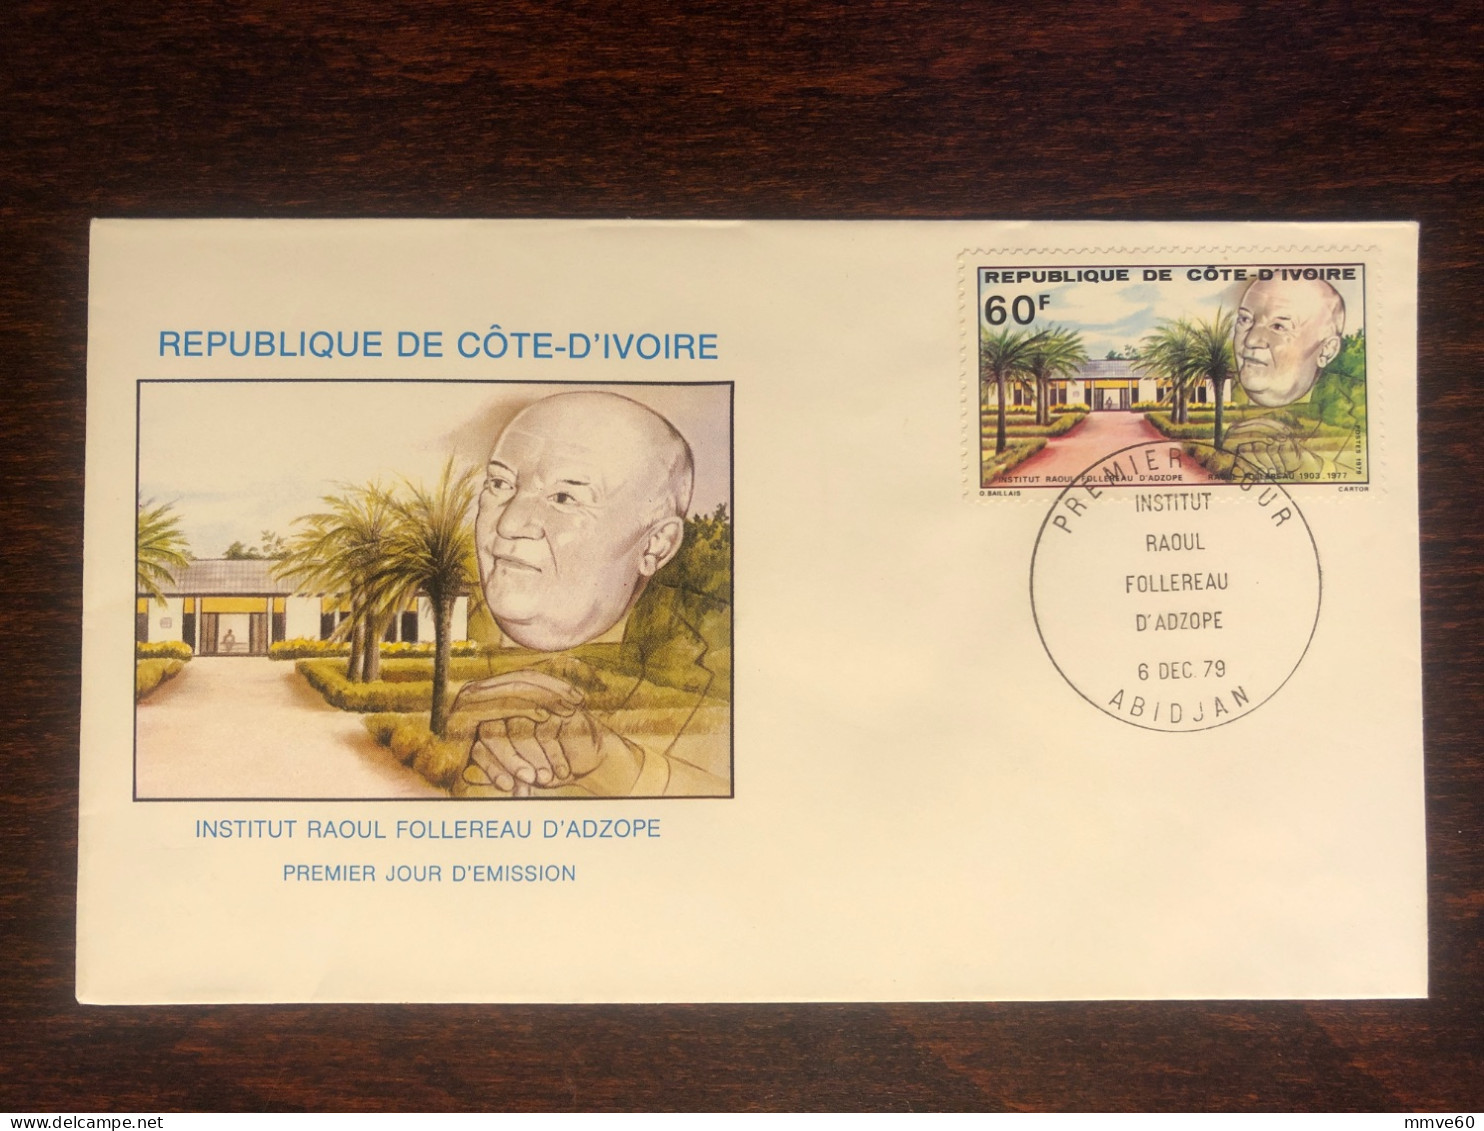 IVORY COAST COTE D’IVOIRE FDC COVER 1979 YEAR LEPROSY LEPRA FOLLEREAU HEALTH MEDICINE STAMPS - Costa D'Avorio (1960-...)